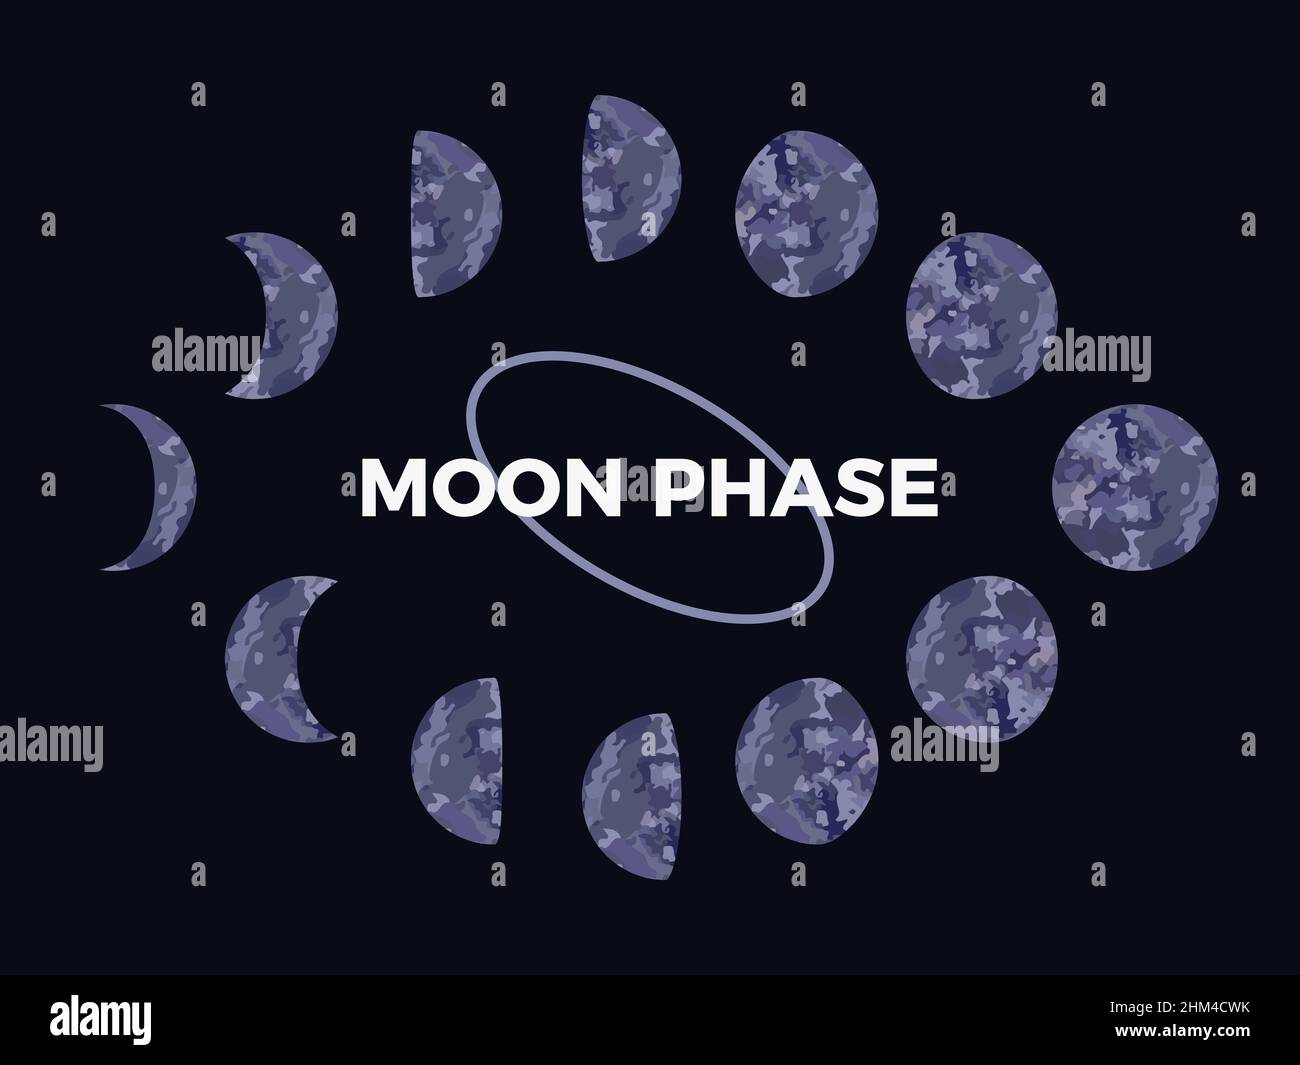 https://c8.alamy.com/comp/2HM4CWK/moon-phase-textured-surface-of-the-moon-lunar-phases-throughout-the-cycle-crescent-type-design-astronomical-observation-of-the-earths-satellite-f-2HM4CWK.jpg